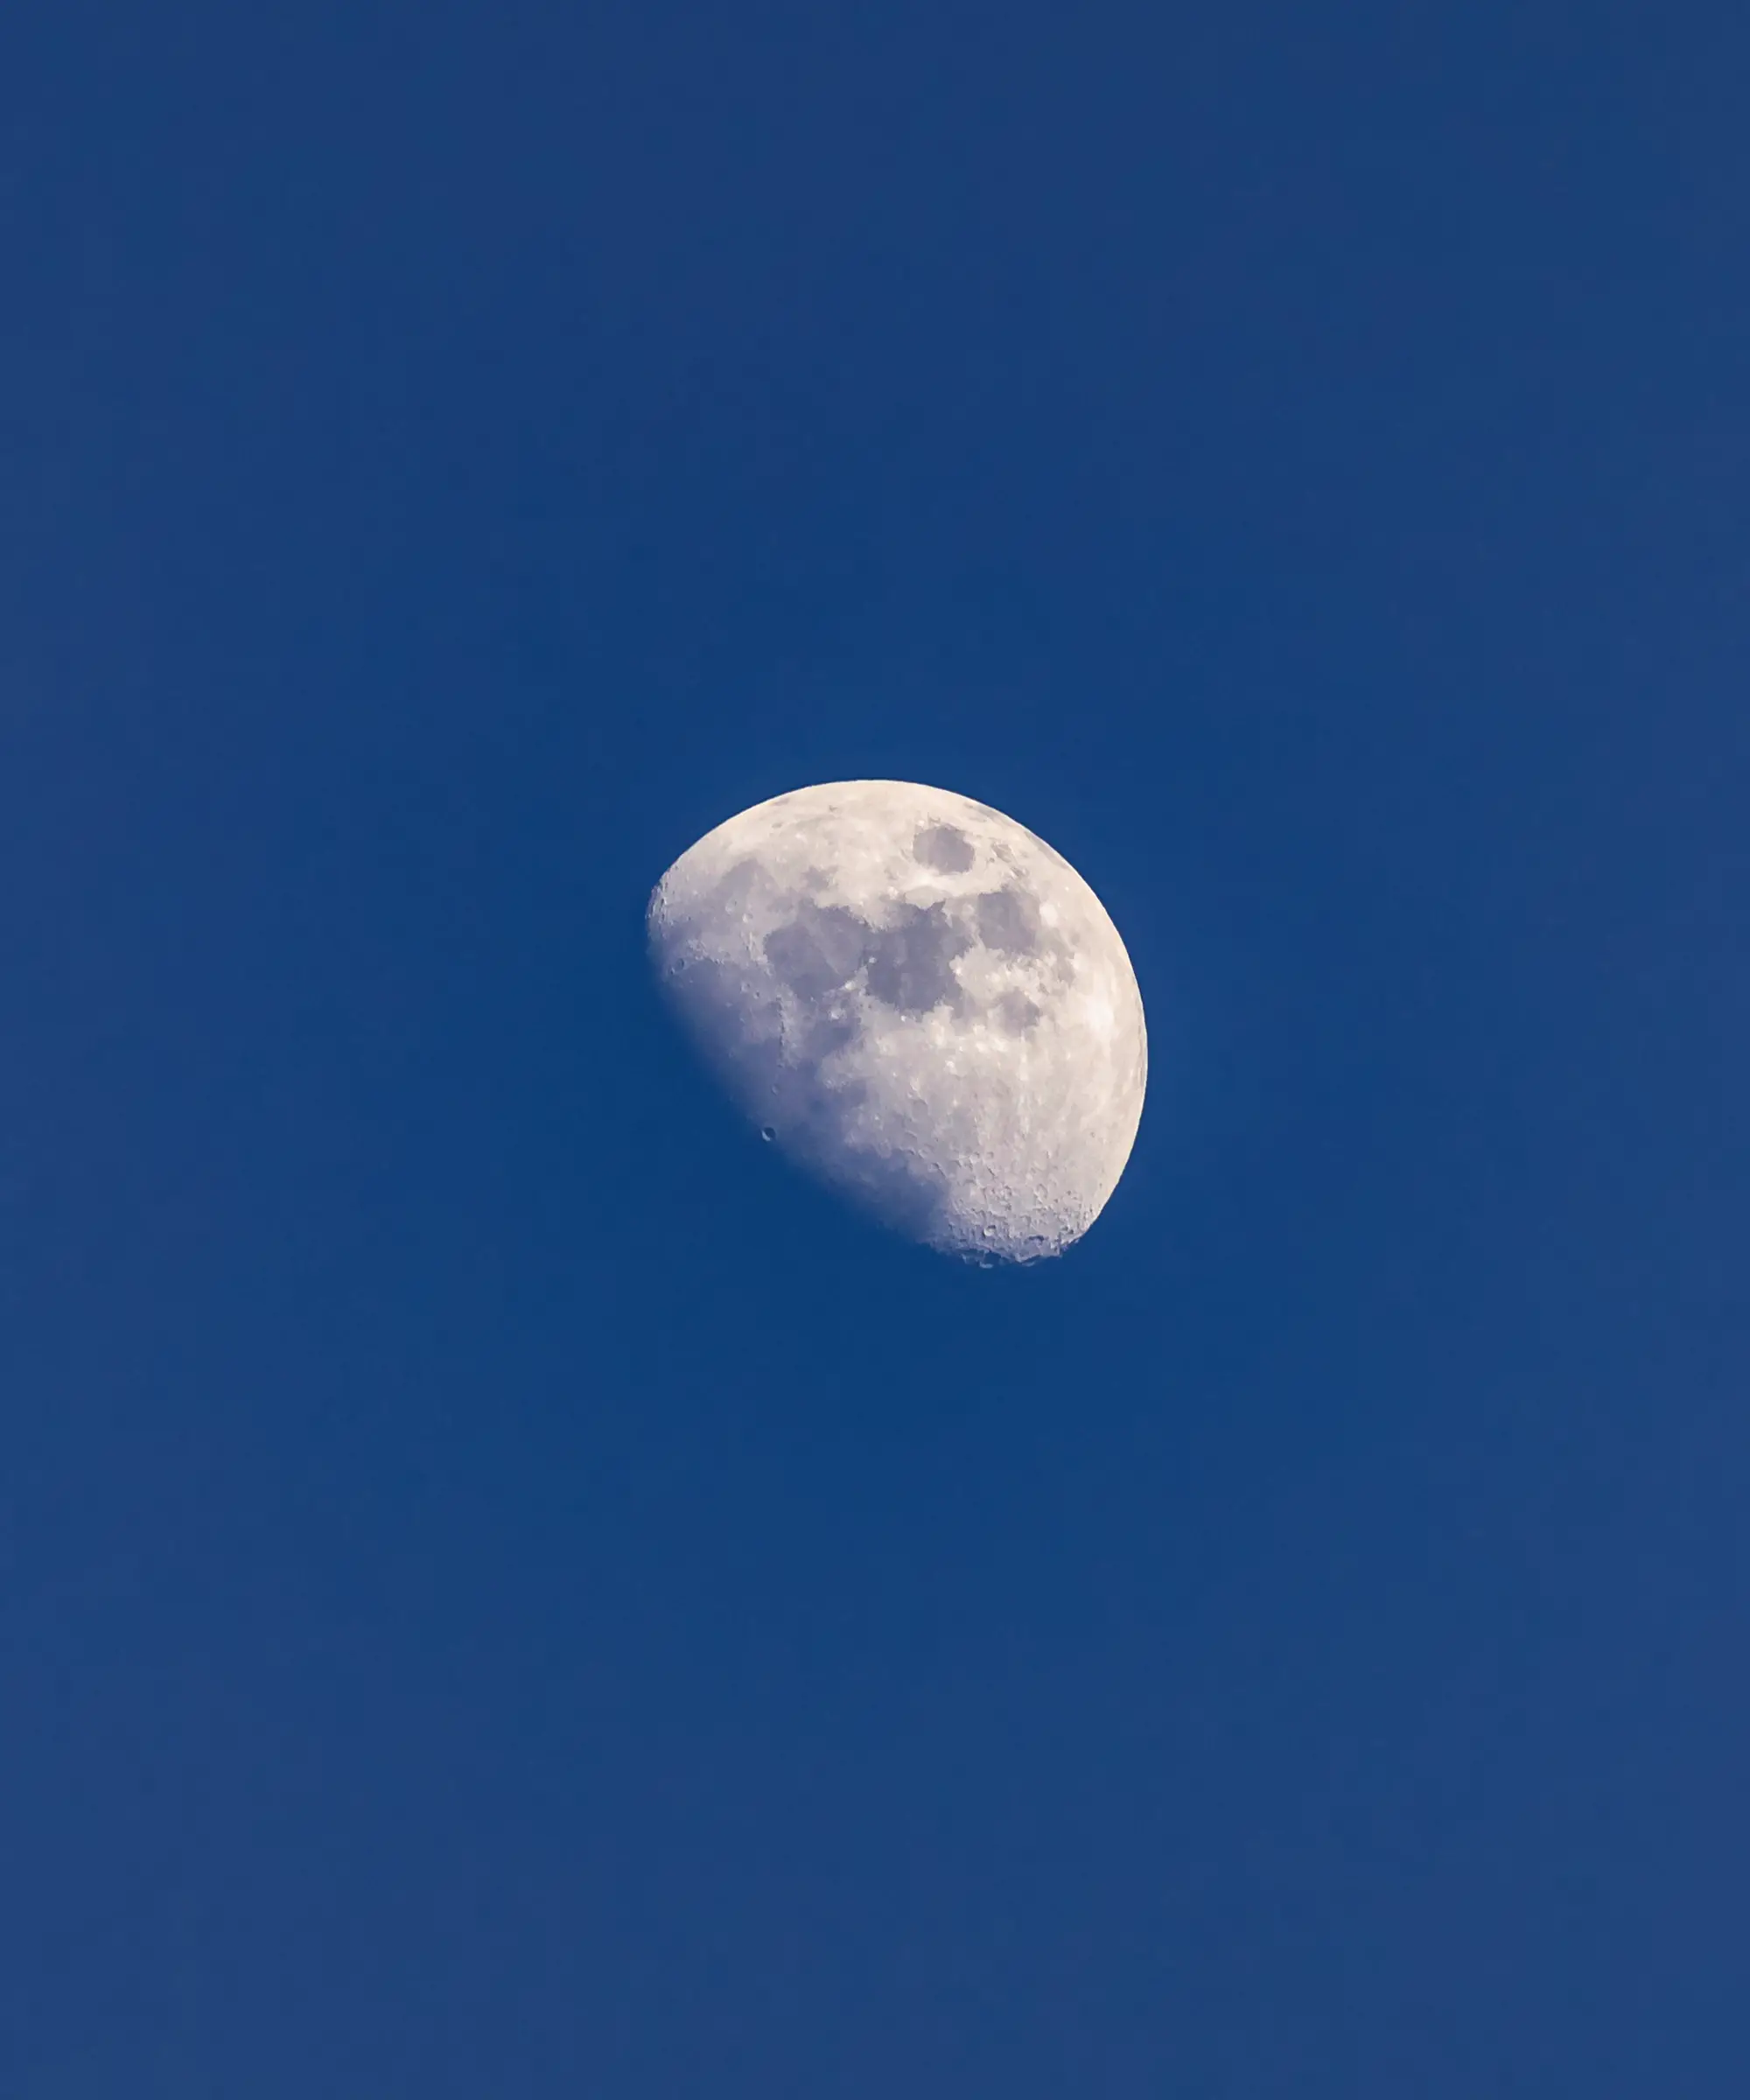 2 Waxing Moon And Spiritual Meaning In Dreams